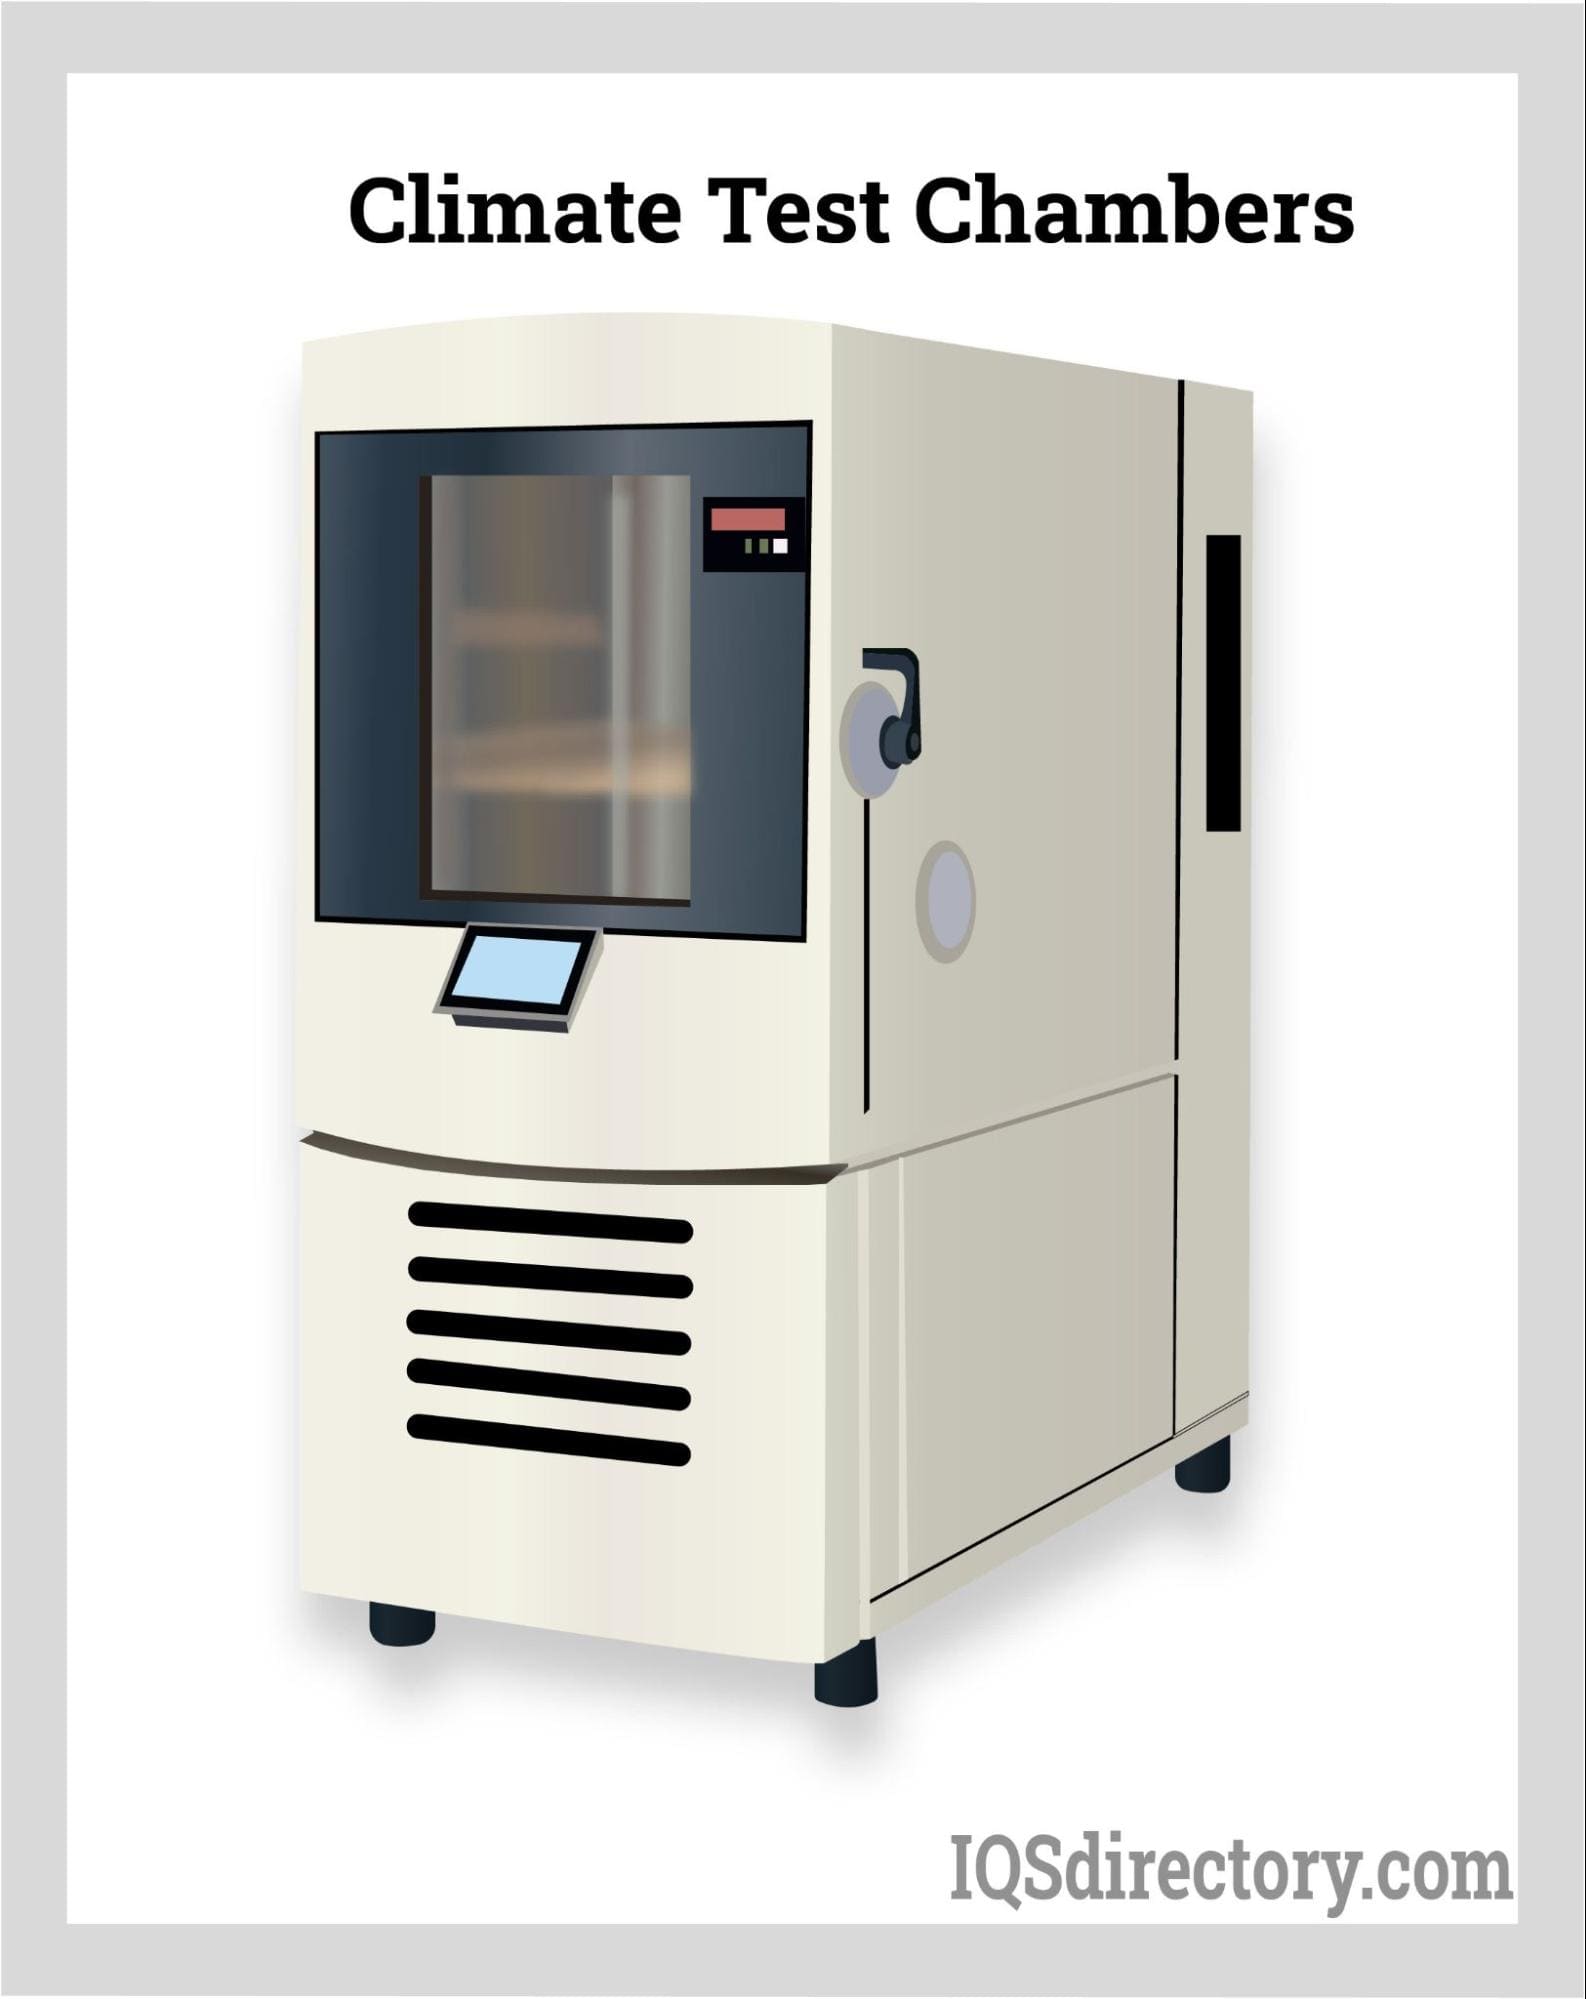 Climate Test Chambers